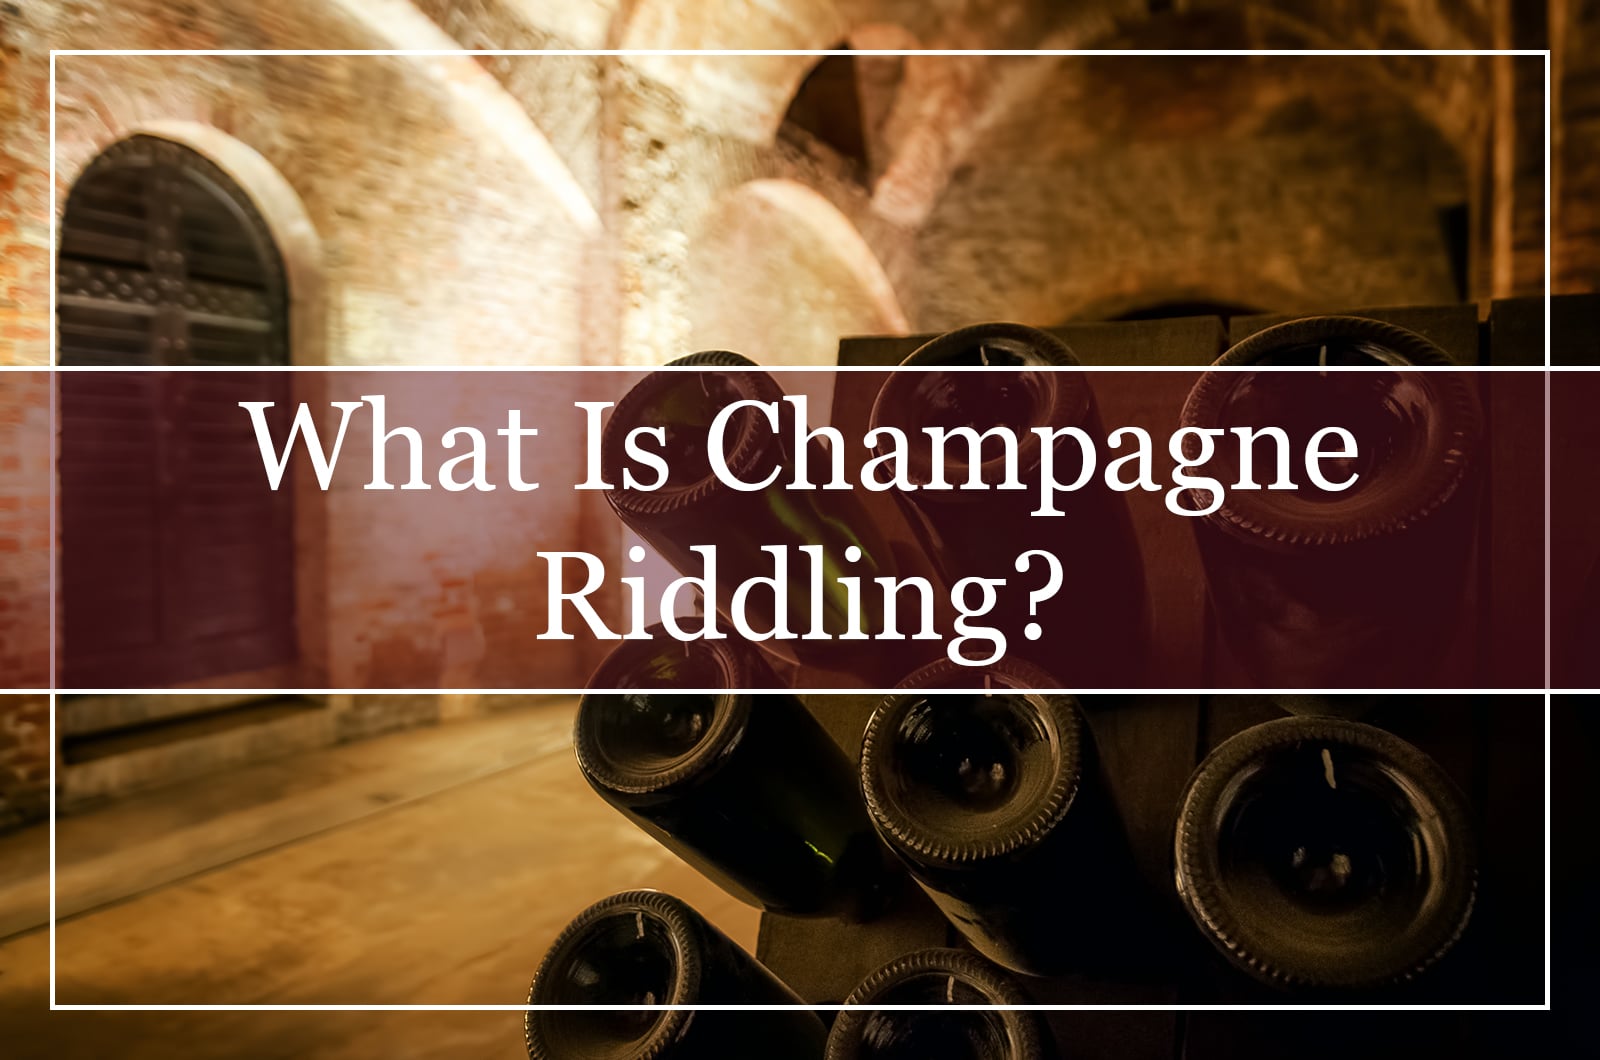 What Is Champagne Riddling